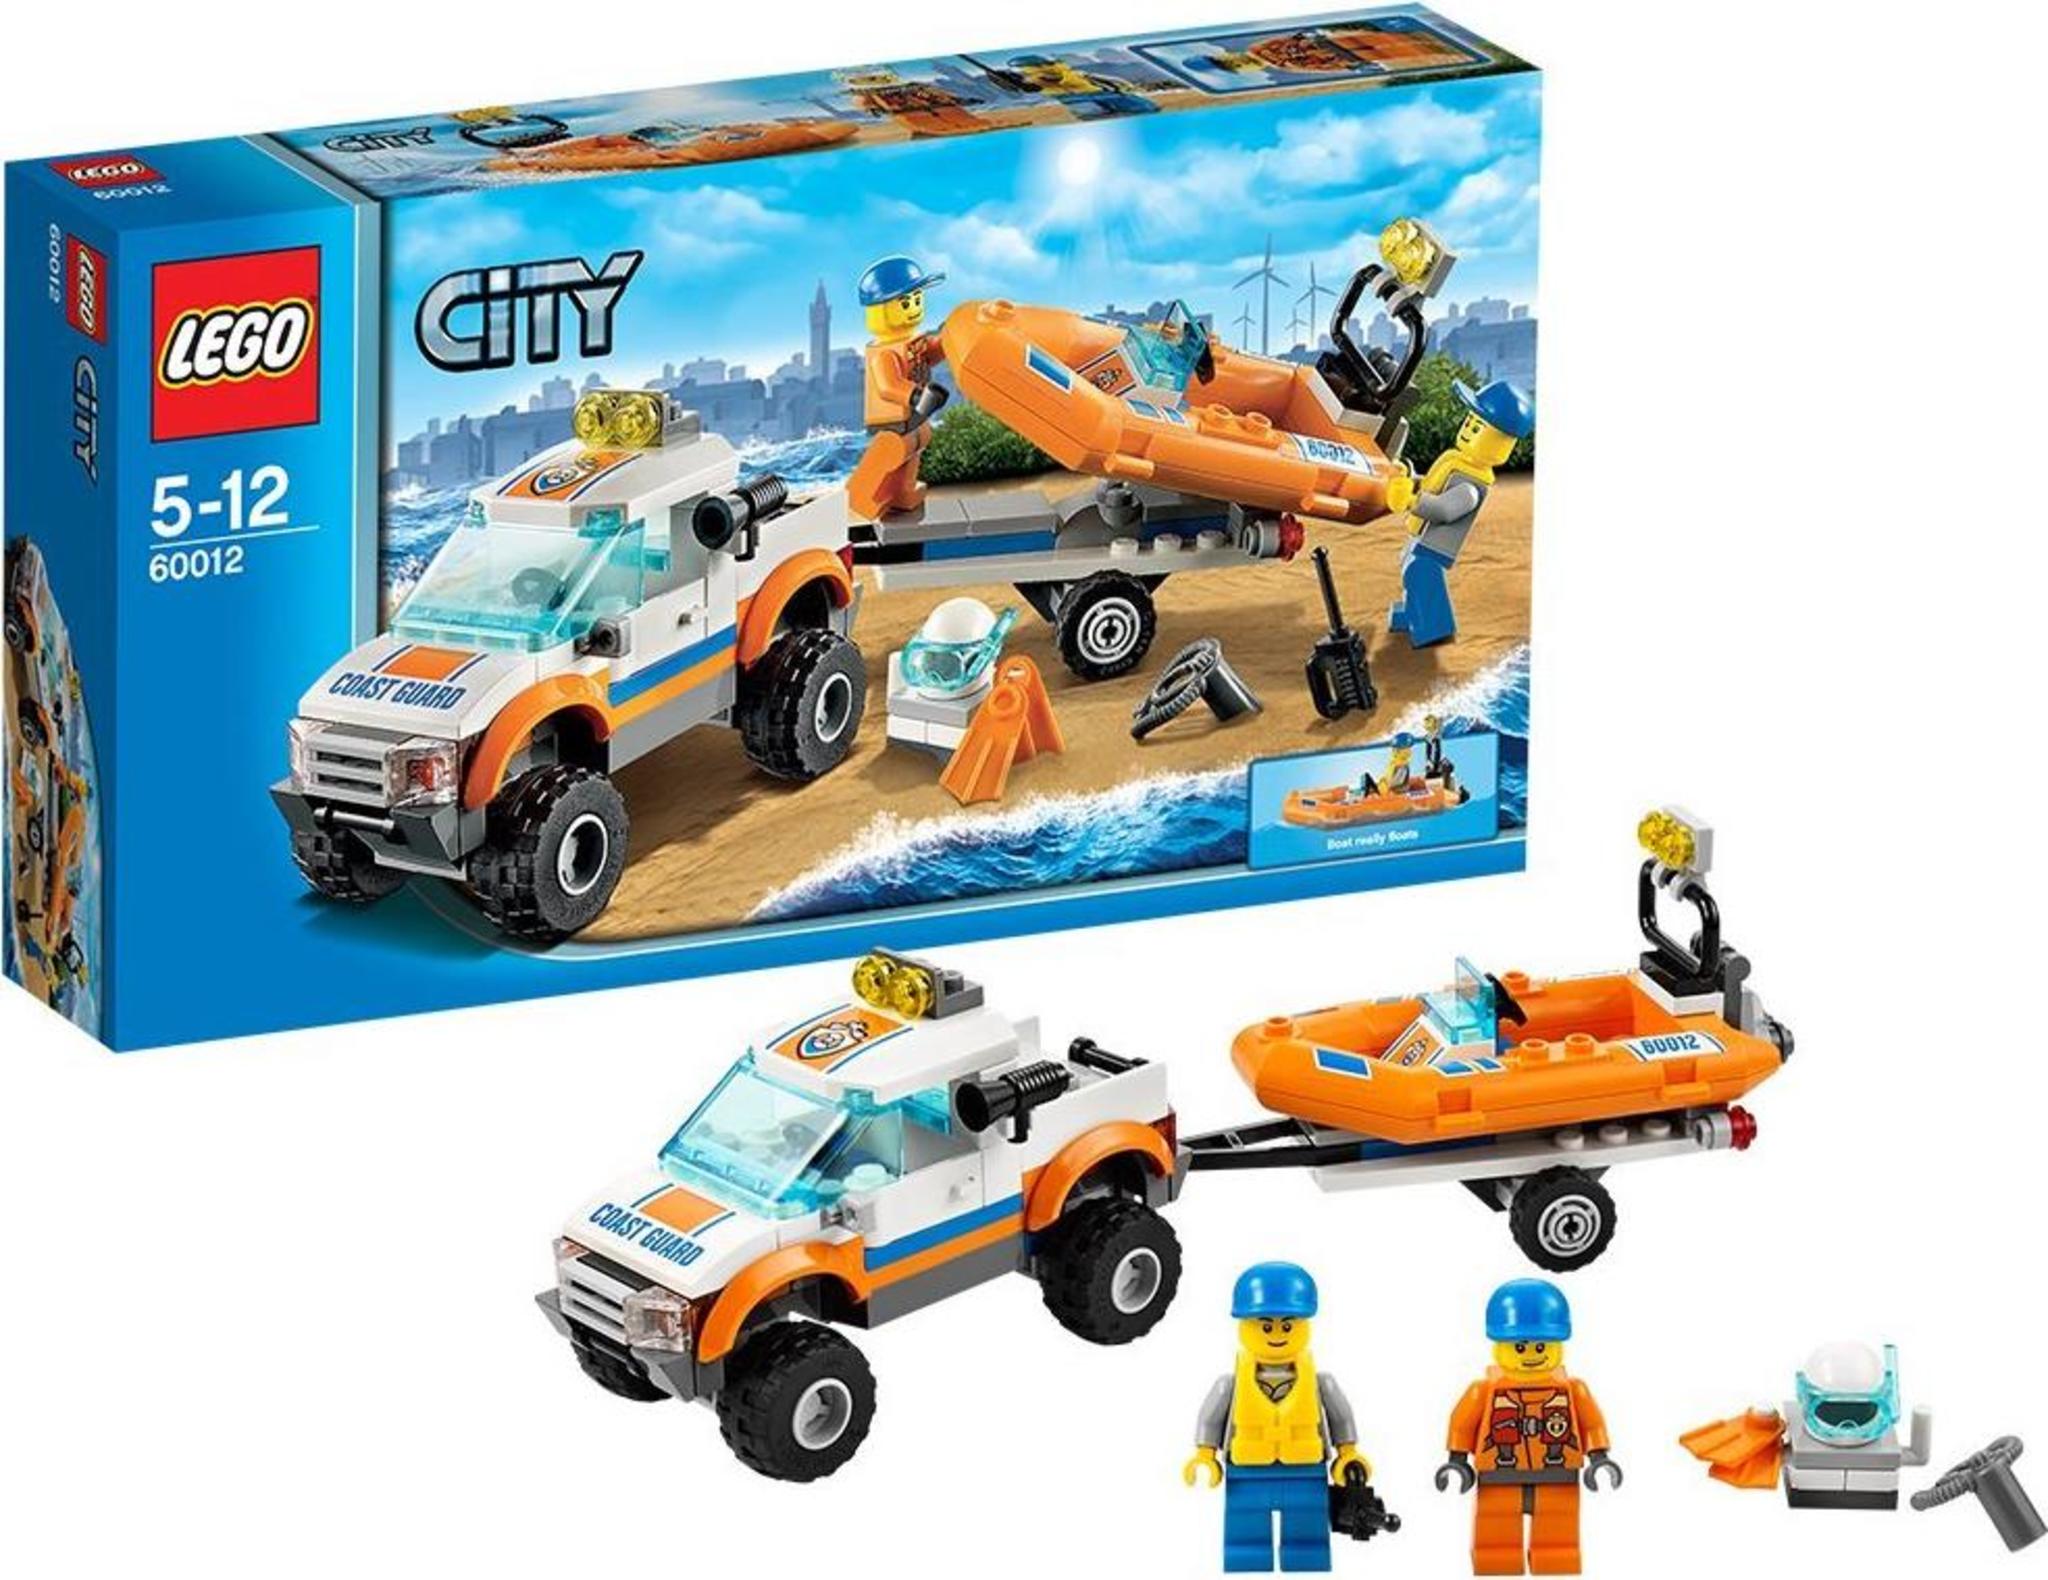 LEGO CITY 60012 4x4 Diving boat Rescue NEW 